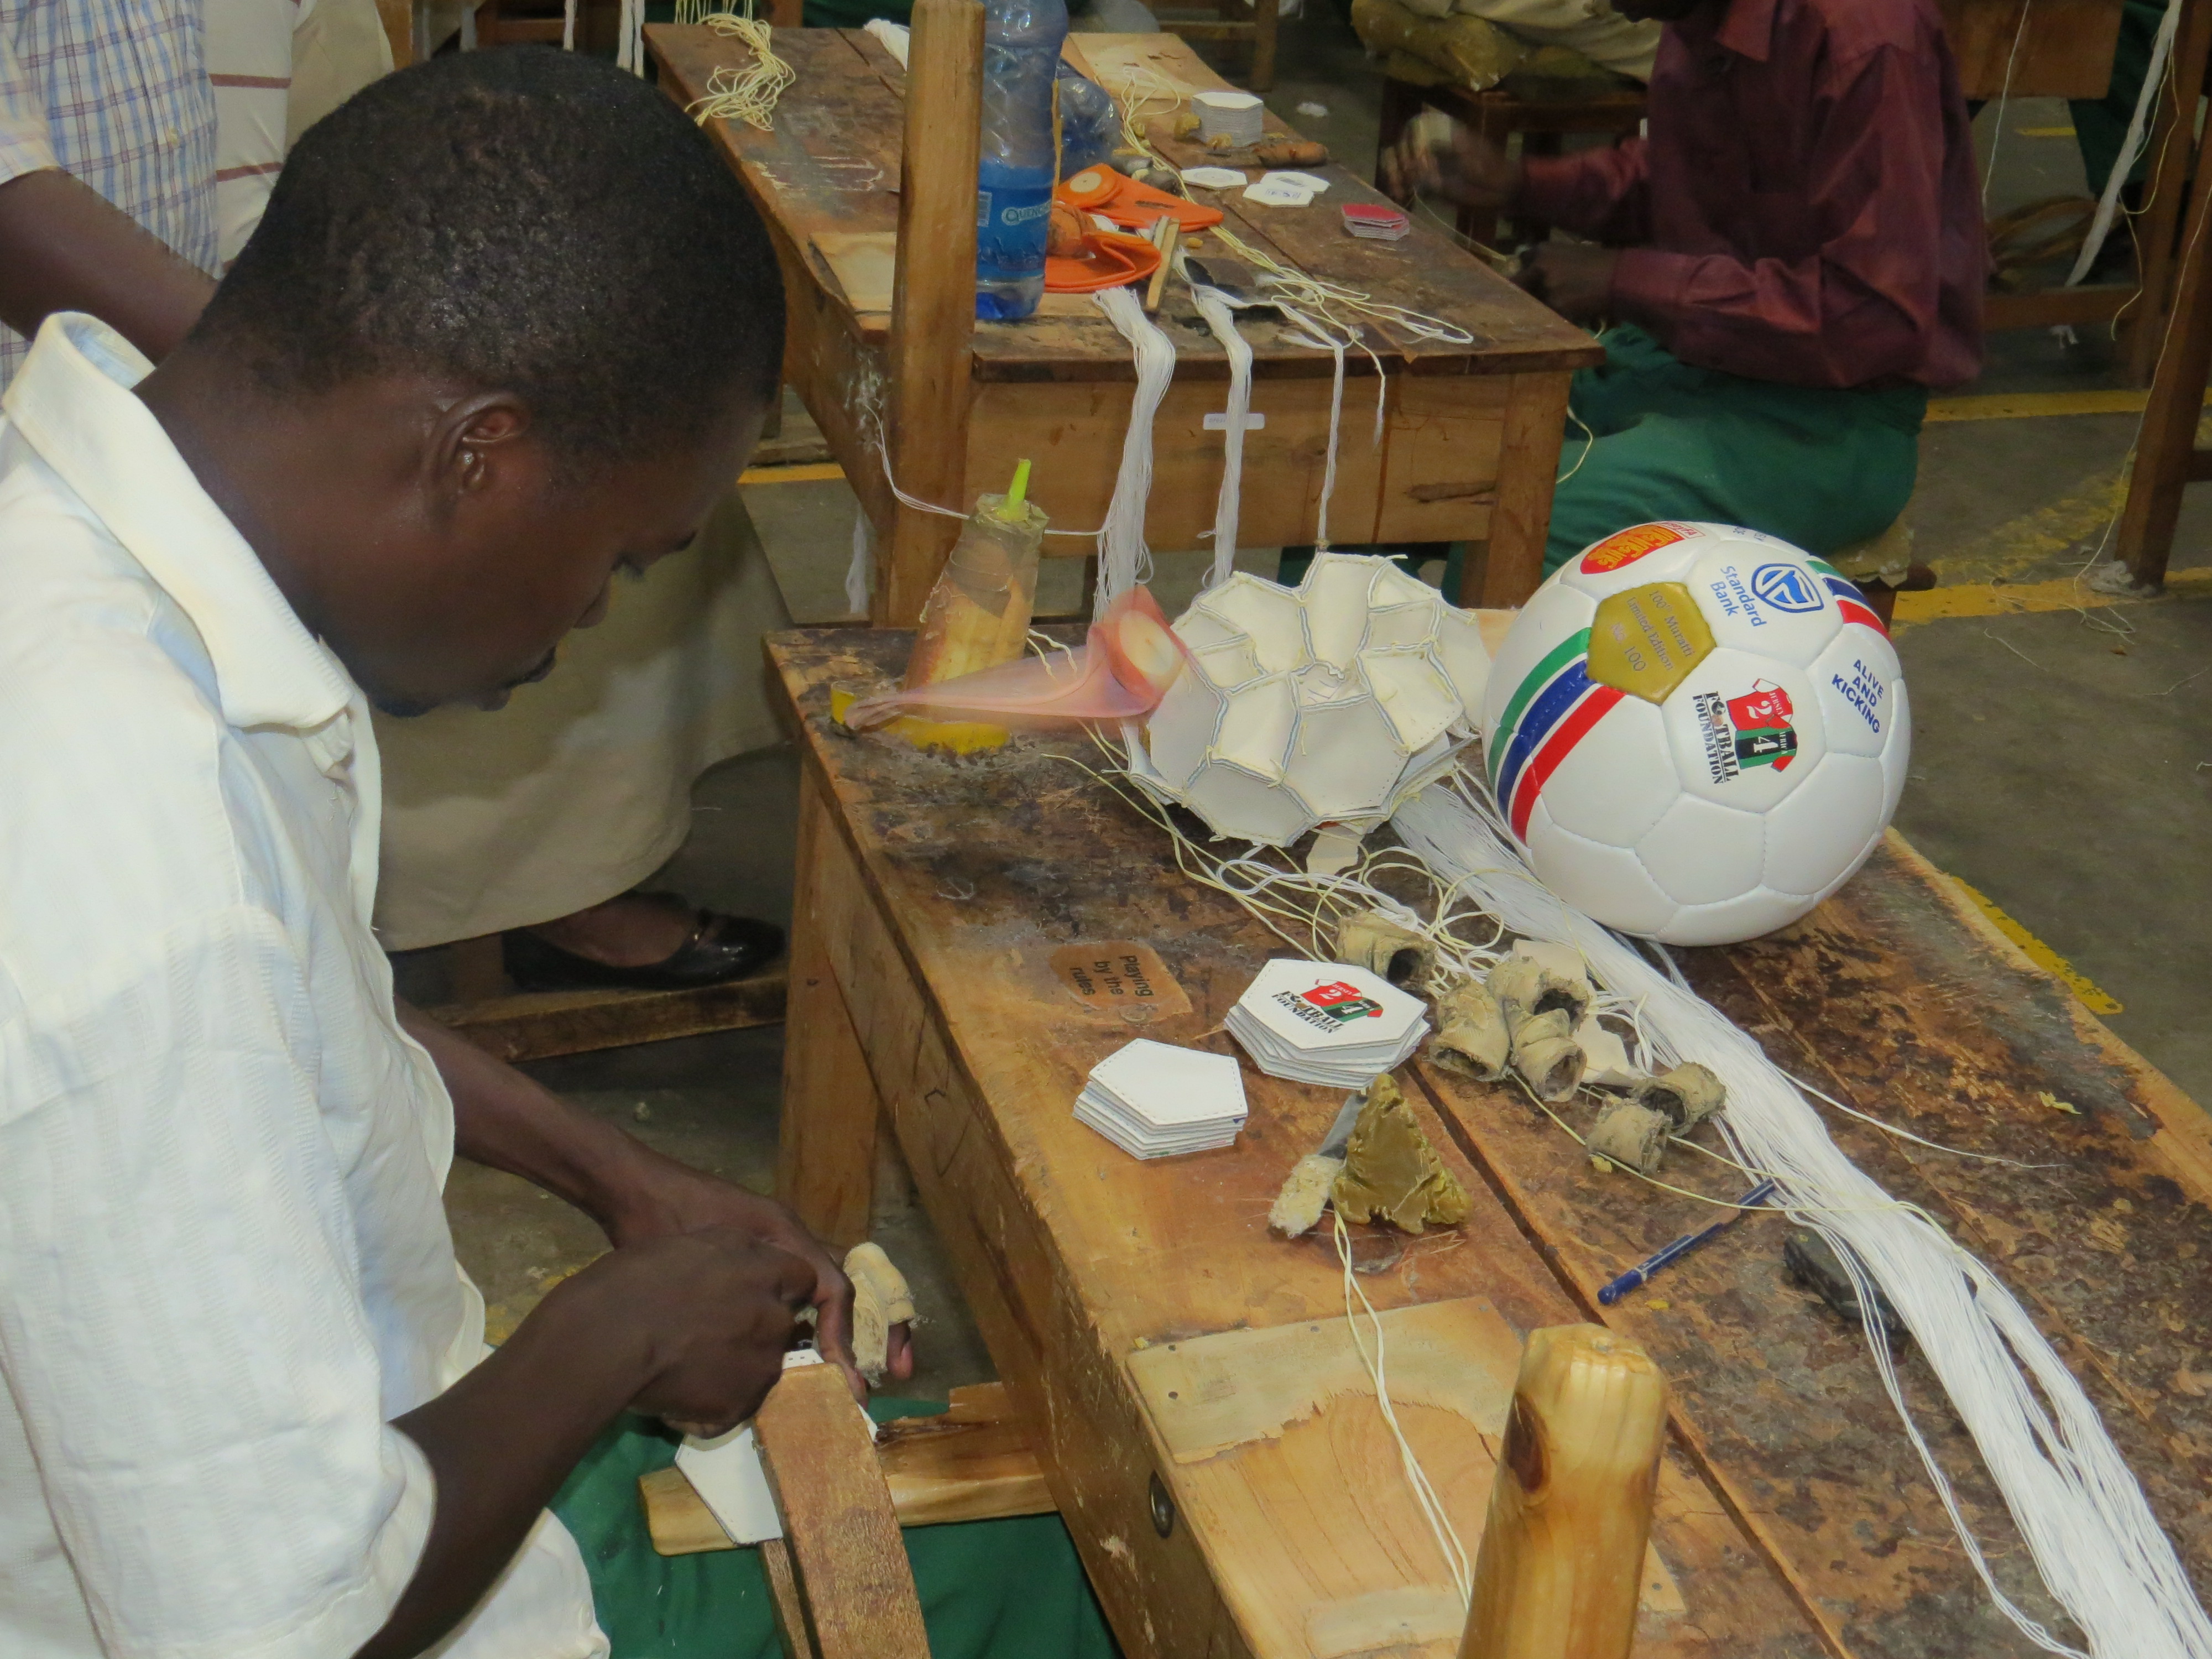 Worker_at_AK_factory_in_Nairobi_hand_stitching_a_football.jpg